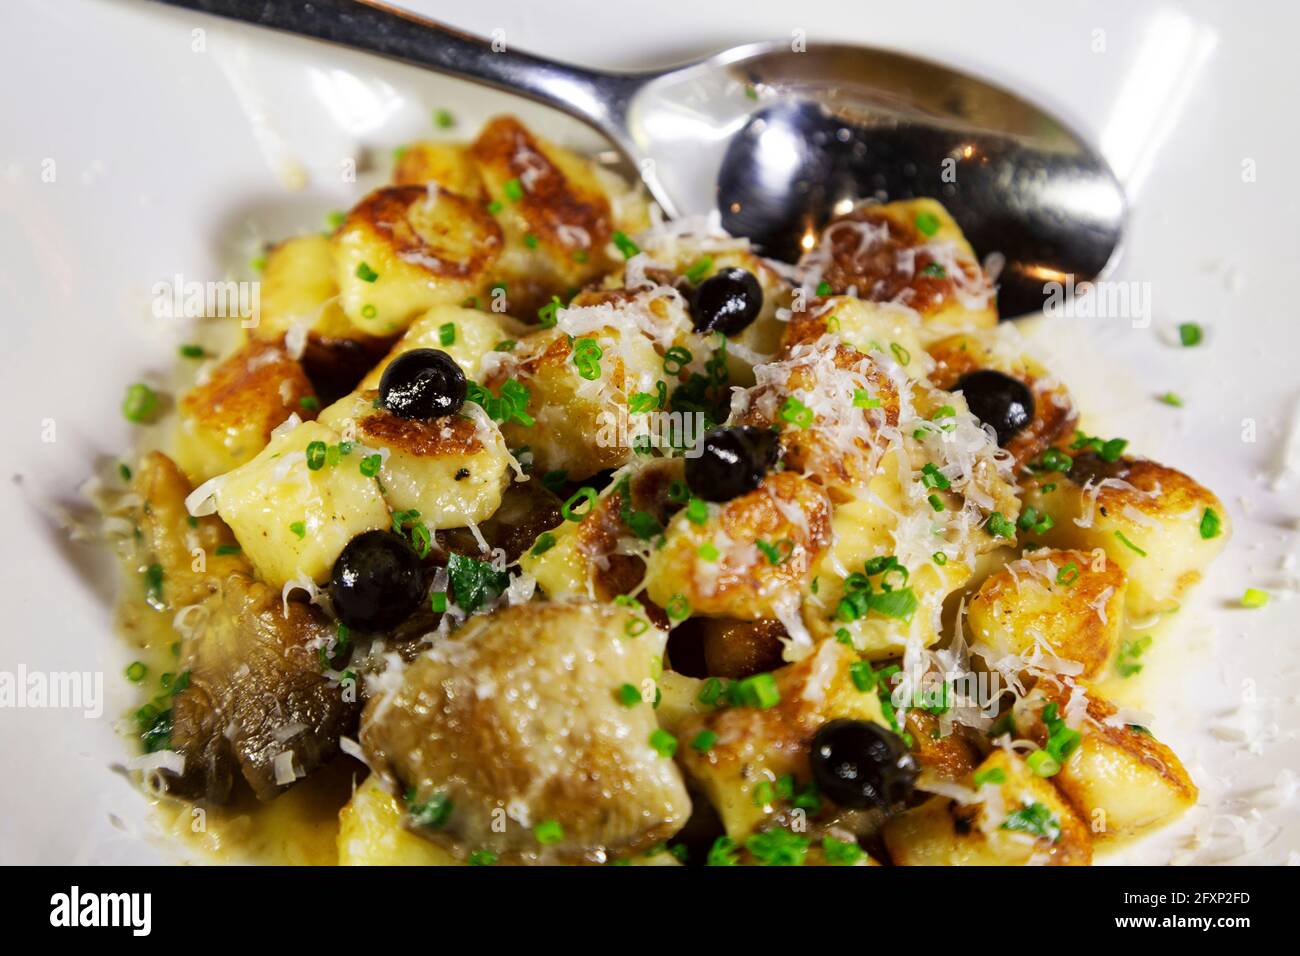 Gnocchi cooked with olives and grated Parmesan cheese. The dish is drizzled with olive oil. Stock Photo